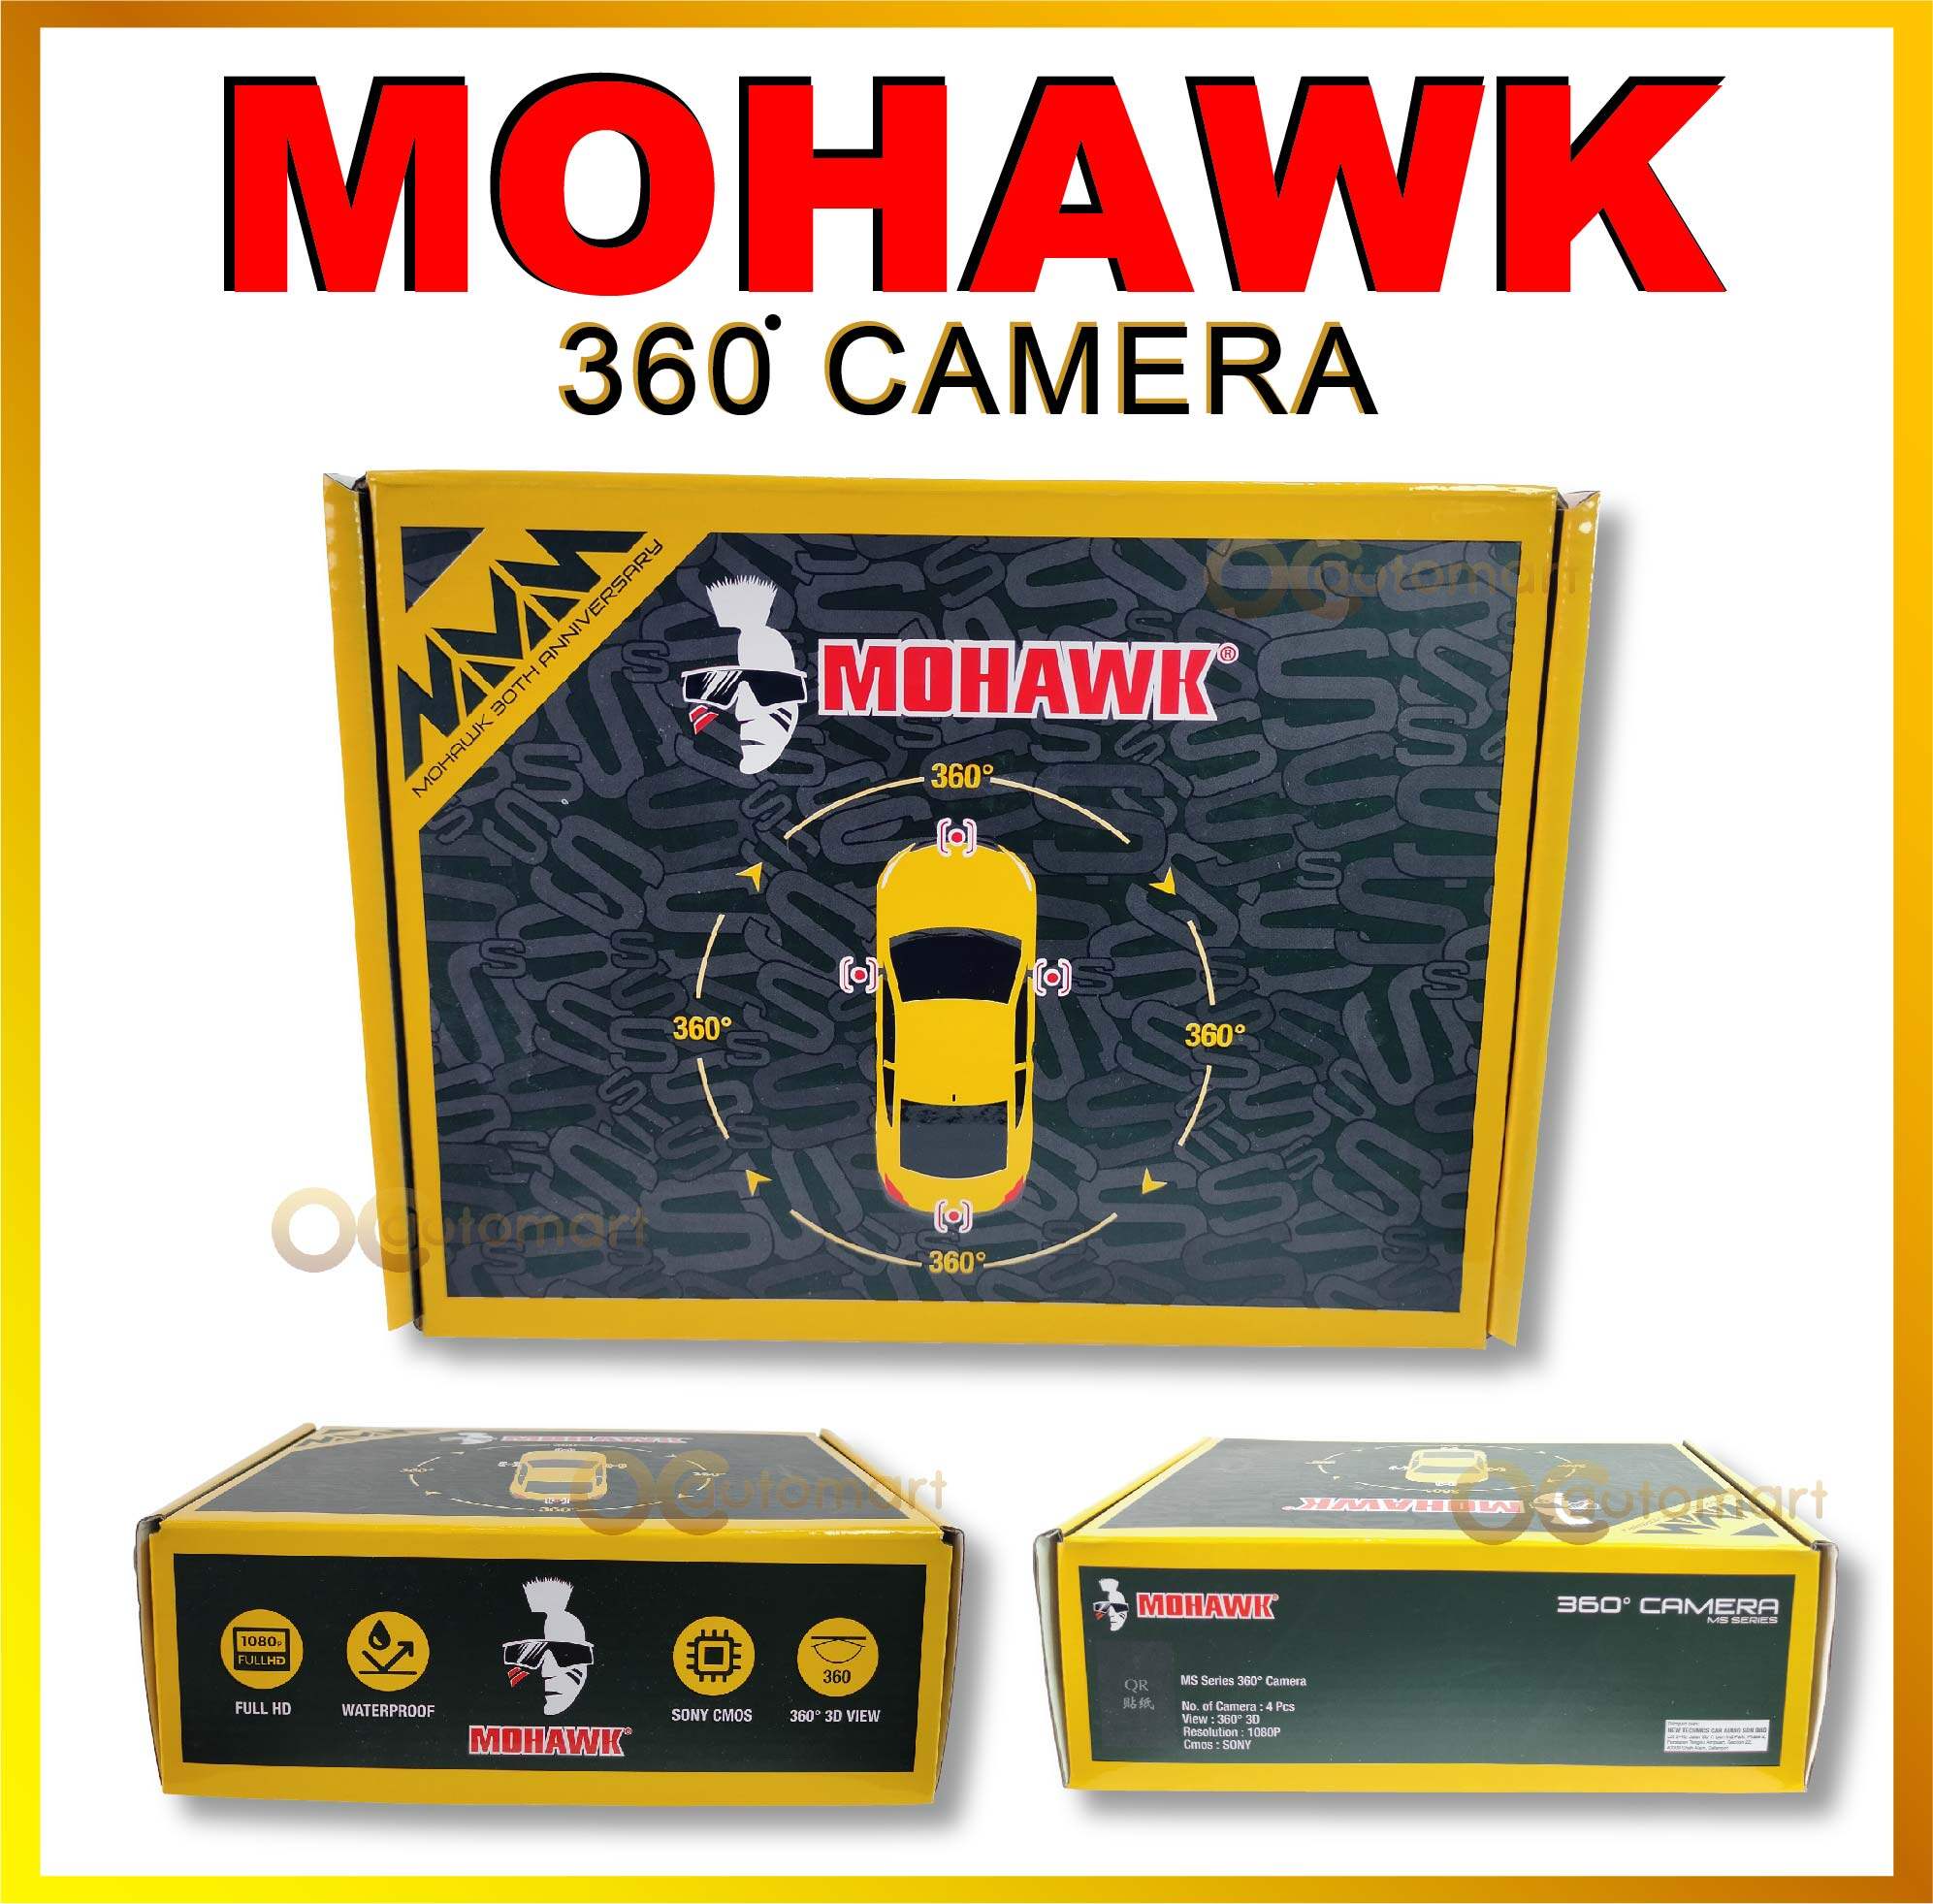 MOHAWK 360 3D View HD Camera MS Series Android 1080P For Android Player Only (4pcs)